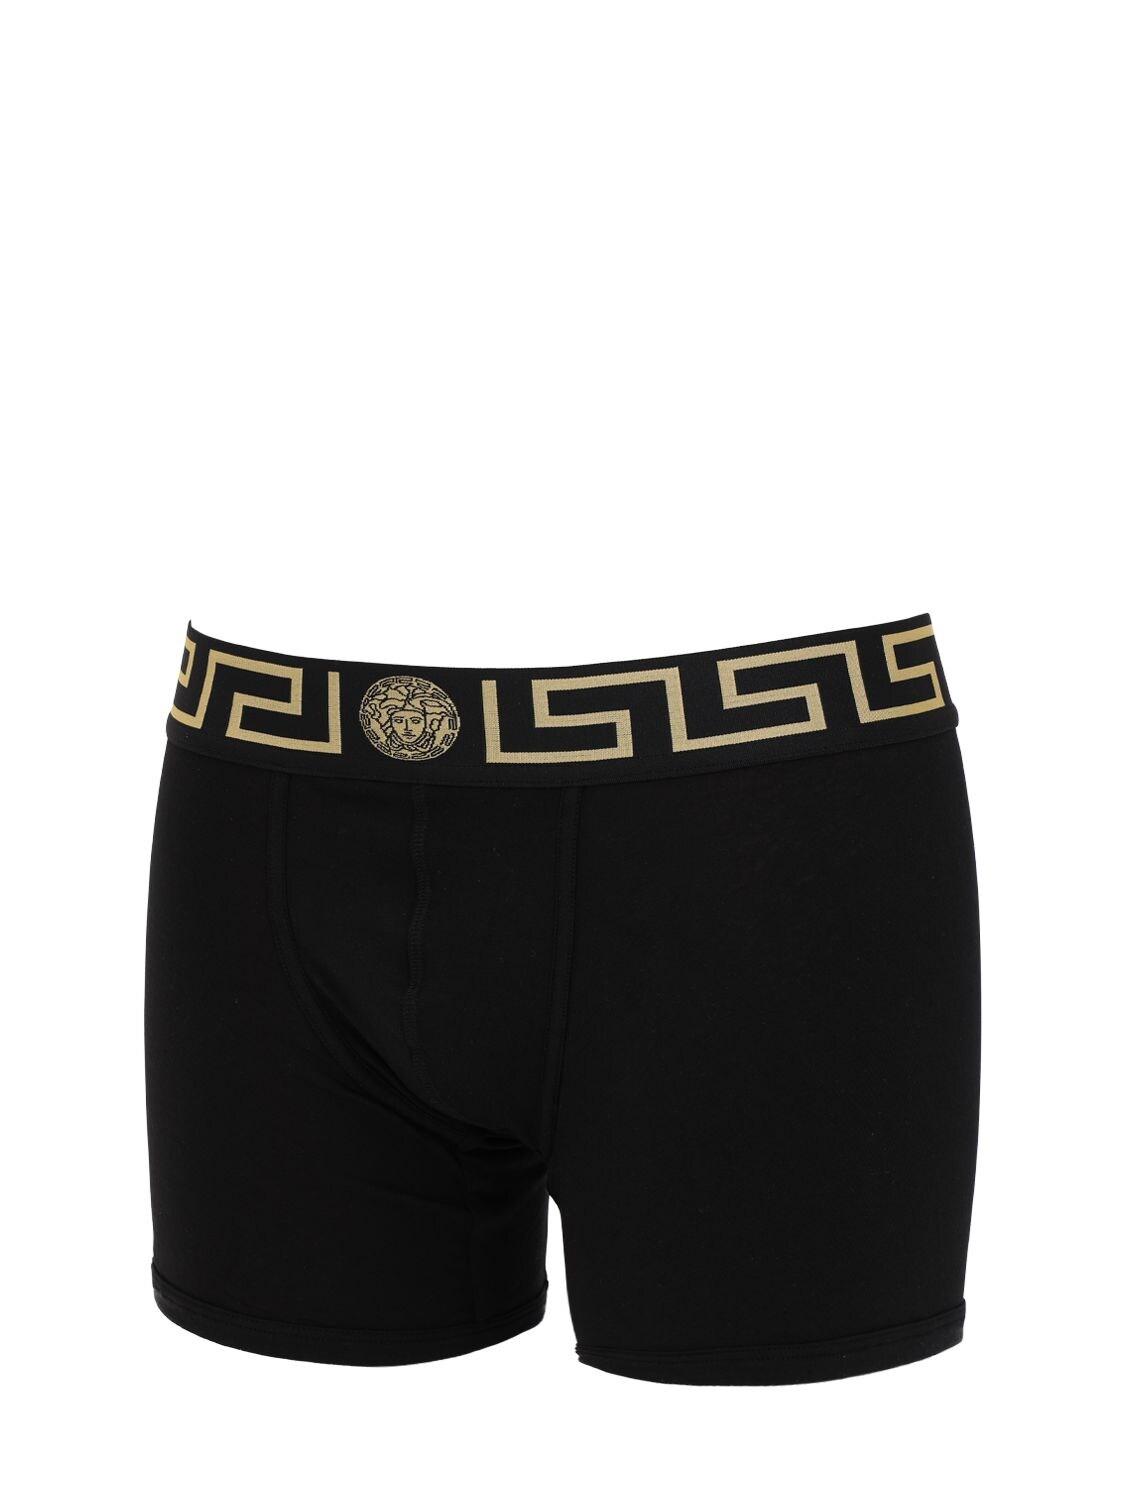 Versace Pack Of 2 Stretch Cotton Boxer Briefs in Black/White (Black ...